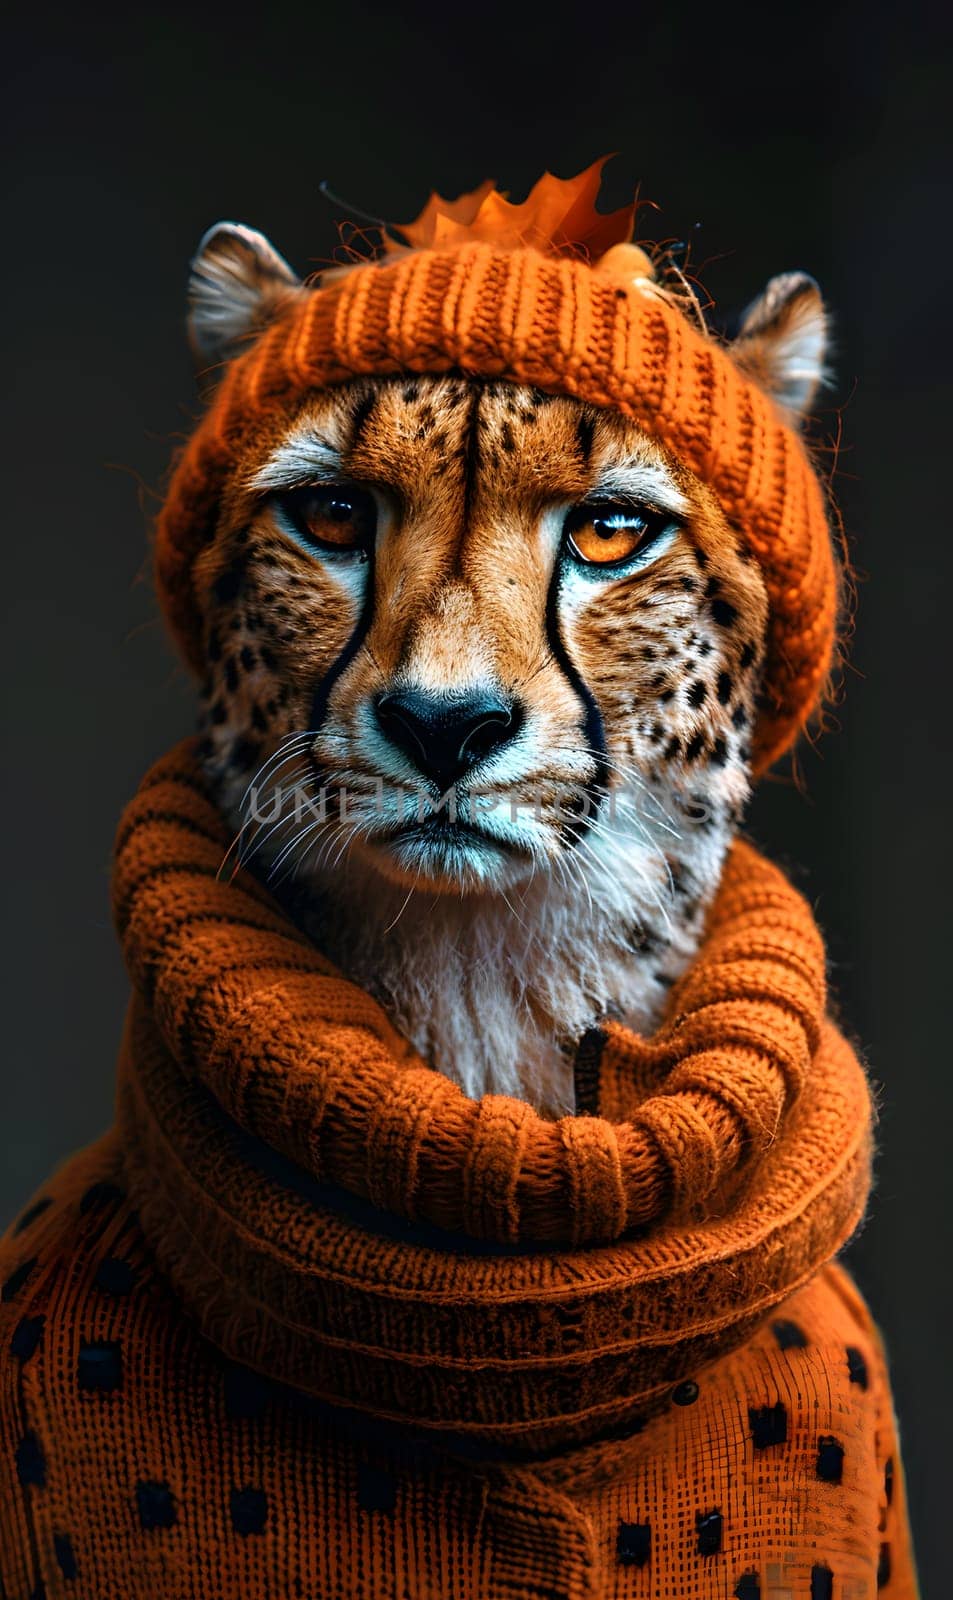 Big cat in a hat and scarf, resembling a hybrid of Bengal and Siberian tigers by Nadtochiy